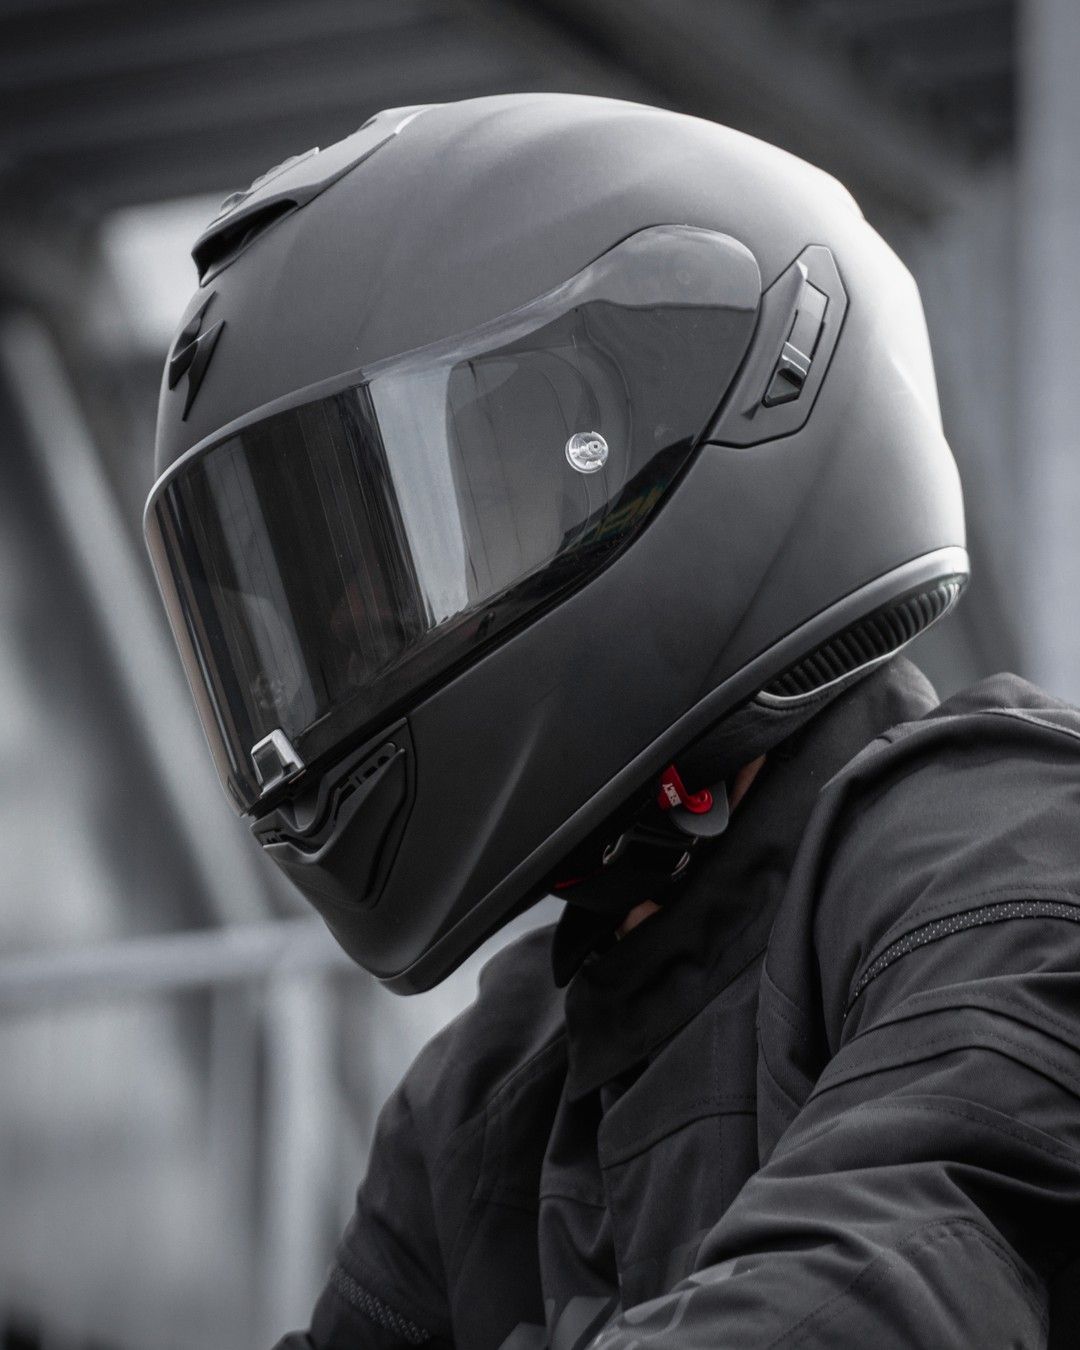 Design your protection with a customizable motorcycle helmet